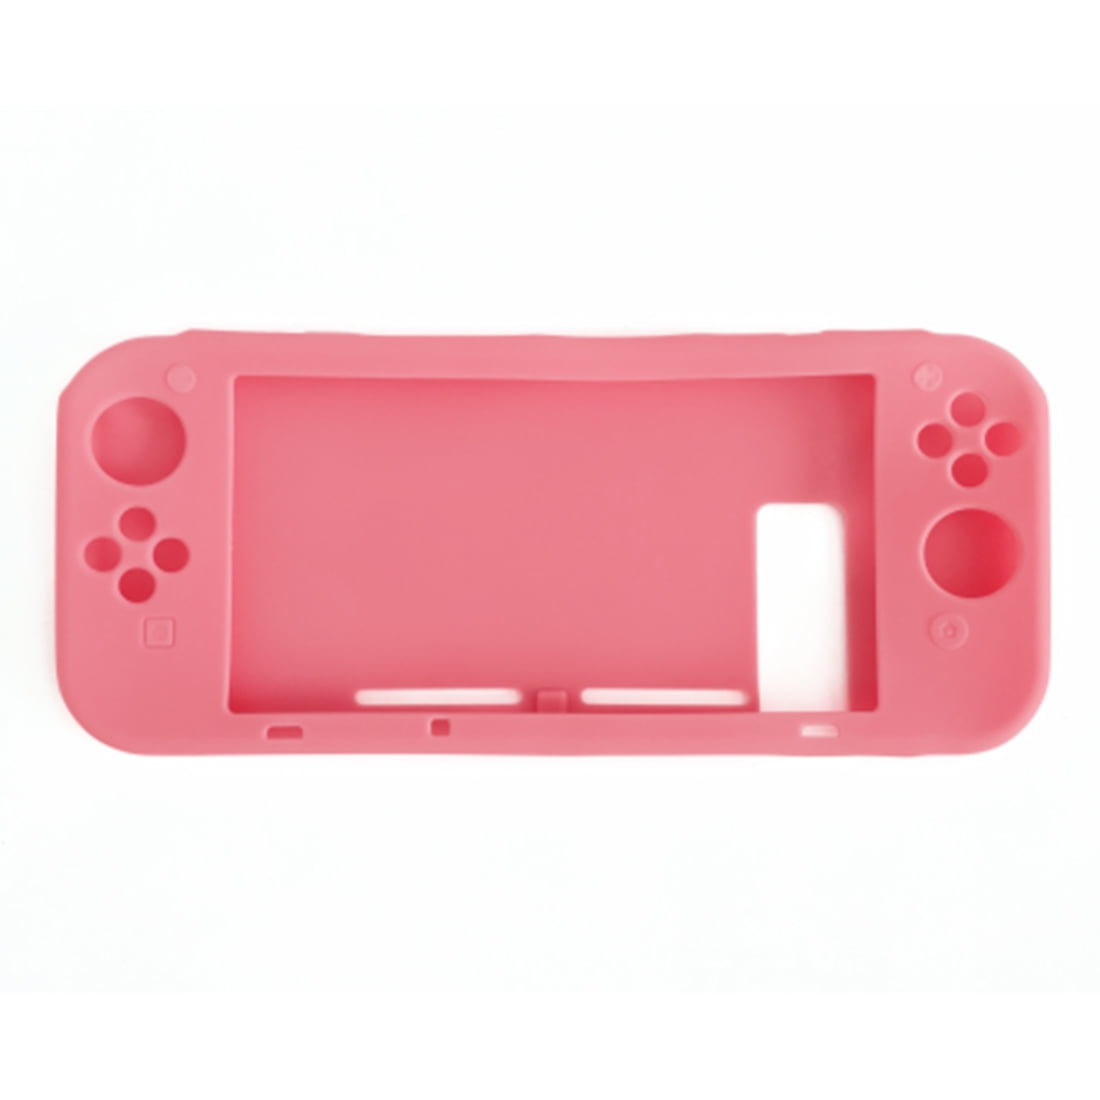 Uxell Nintendo Switch Accessories Silicone Console Case Grip Protector Cover